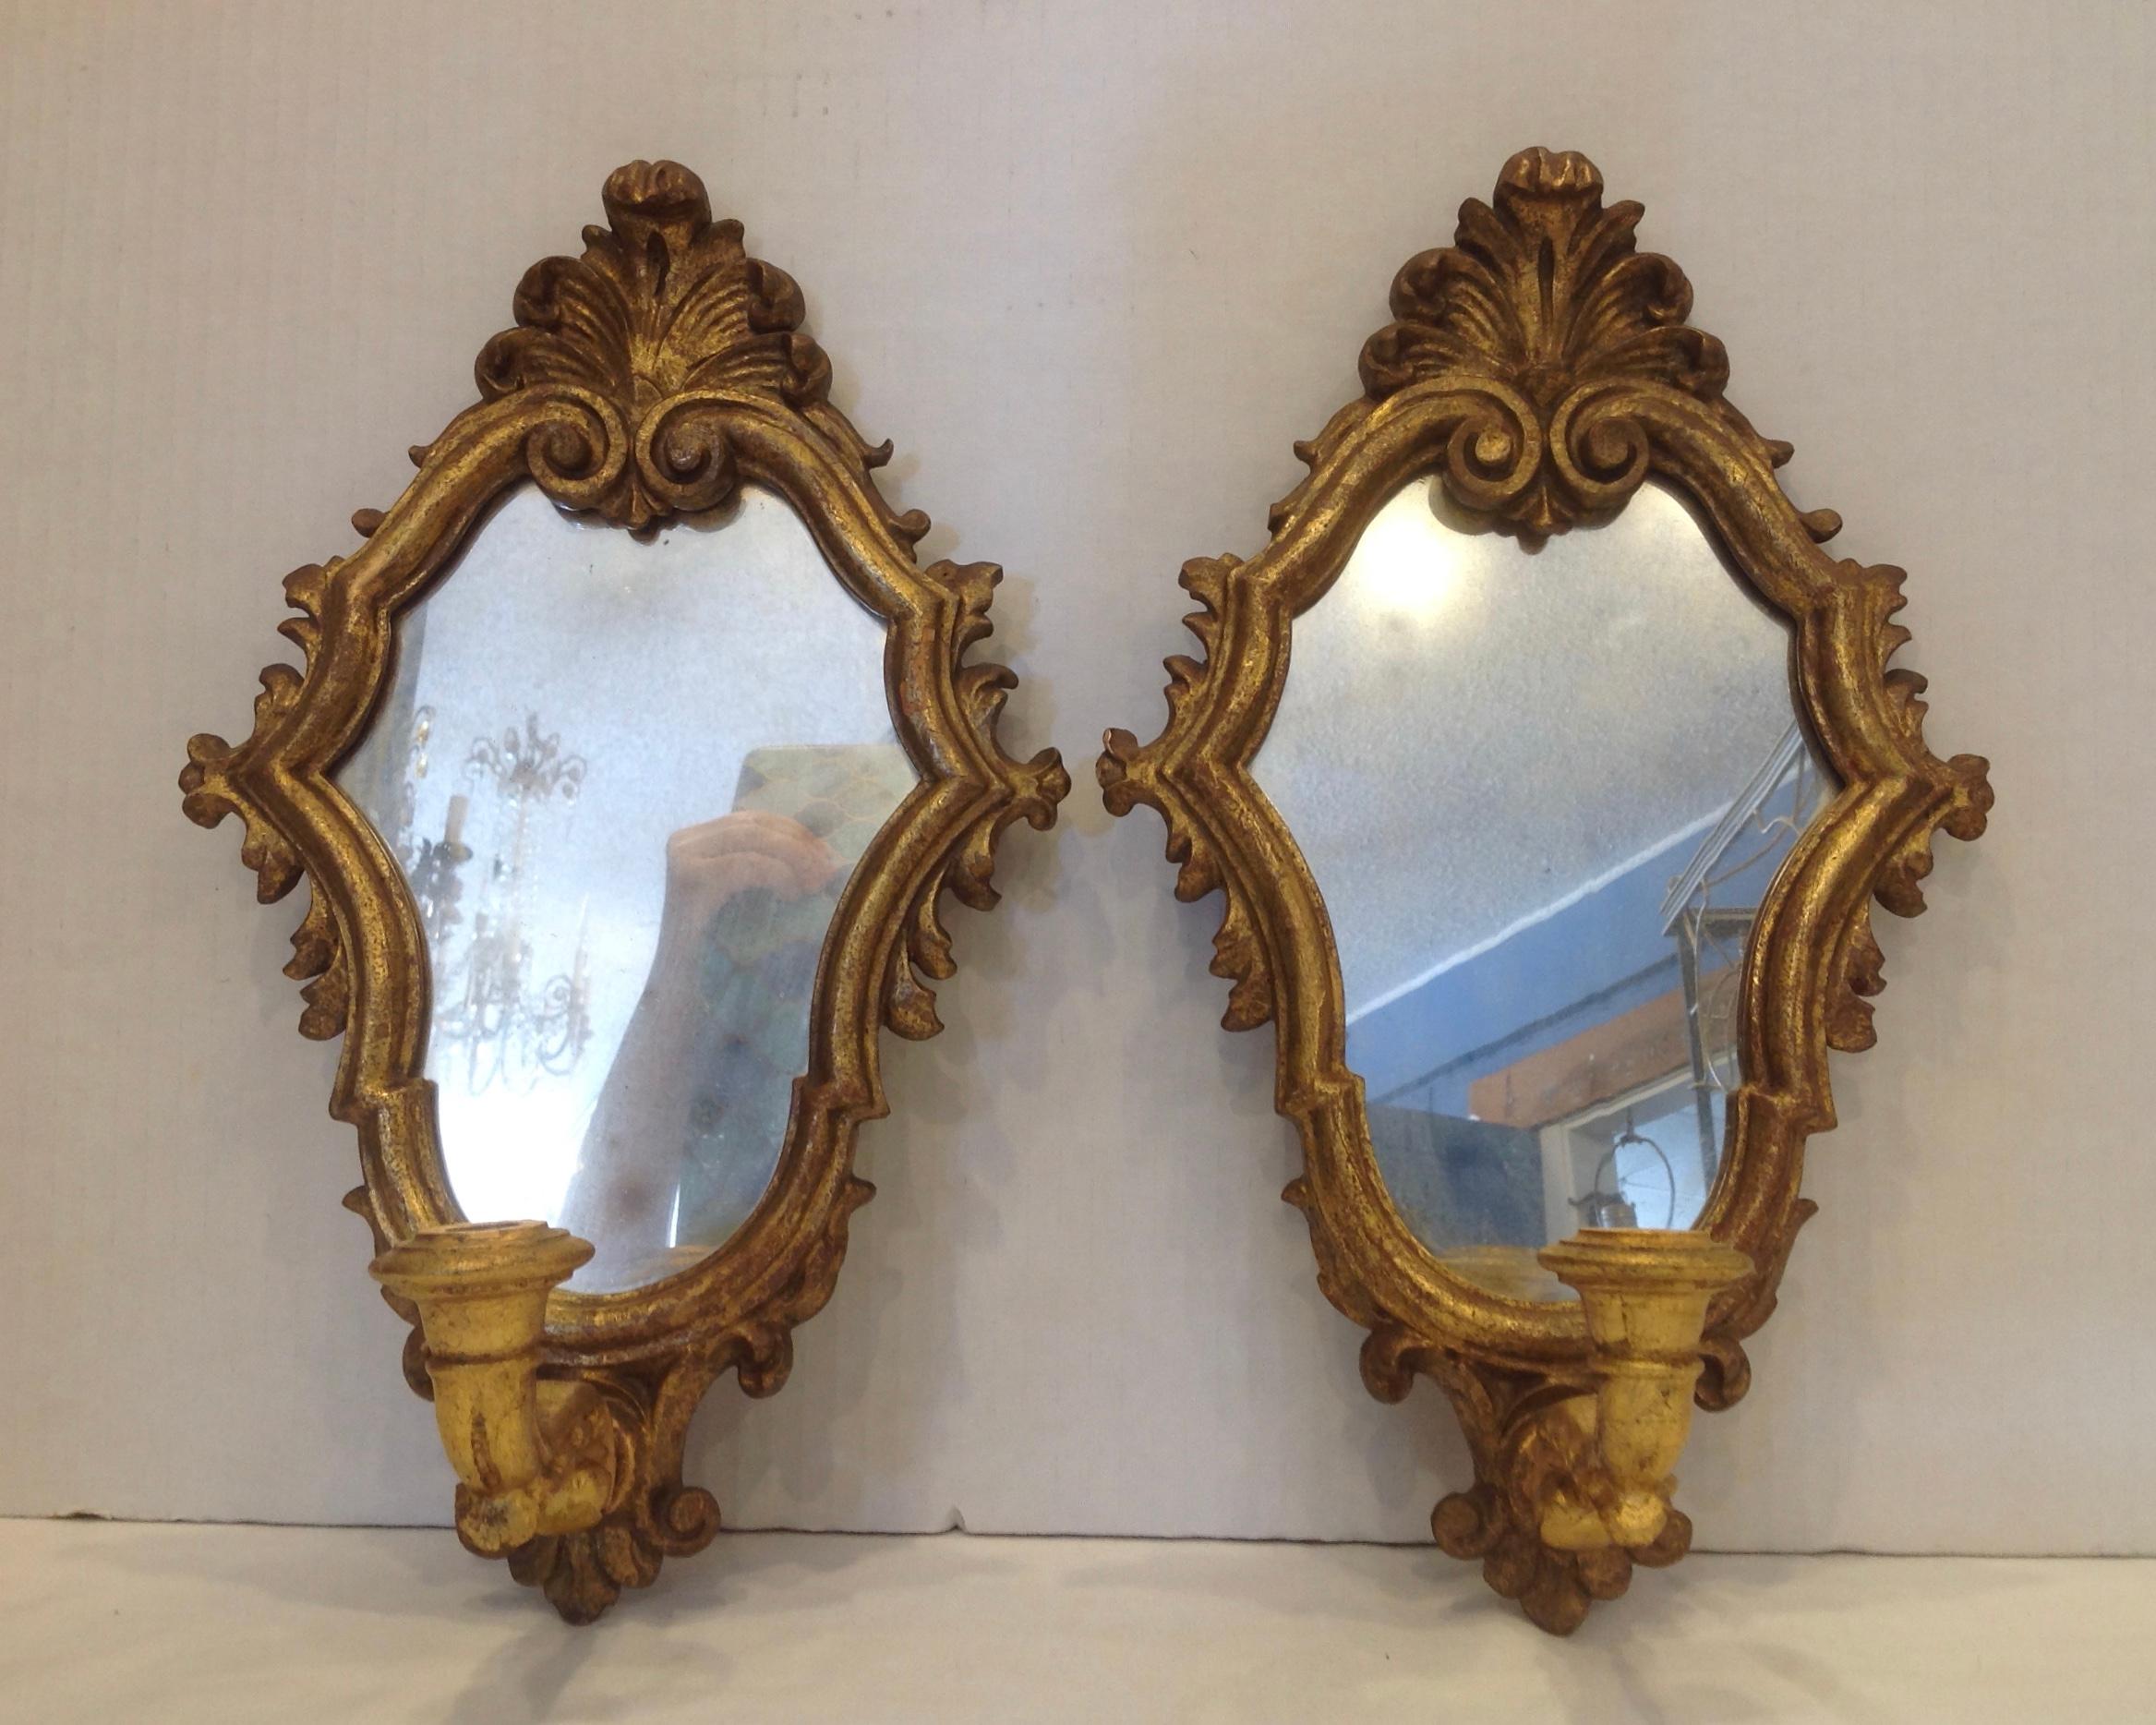 Lovely carved giltwood accent sconces fashioned with plume like crests.